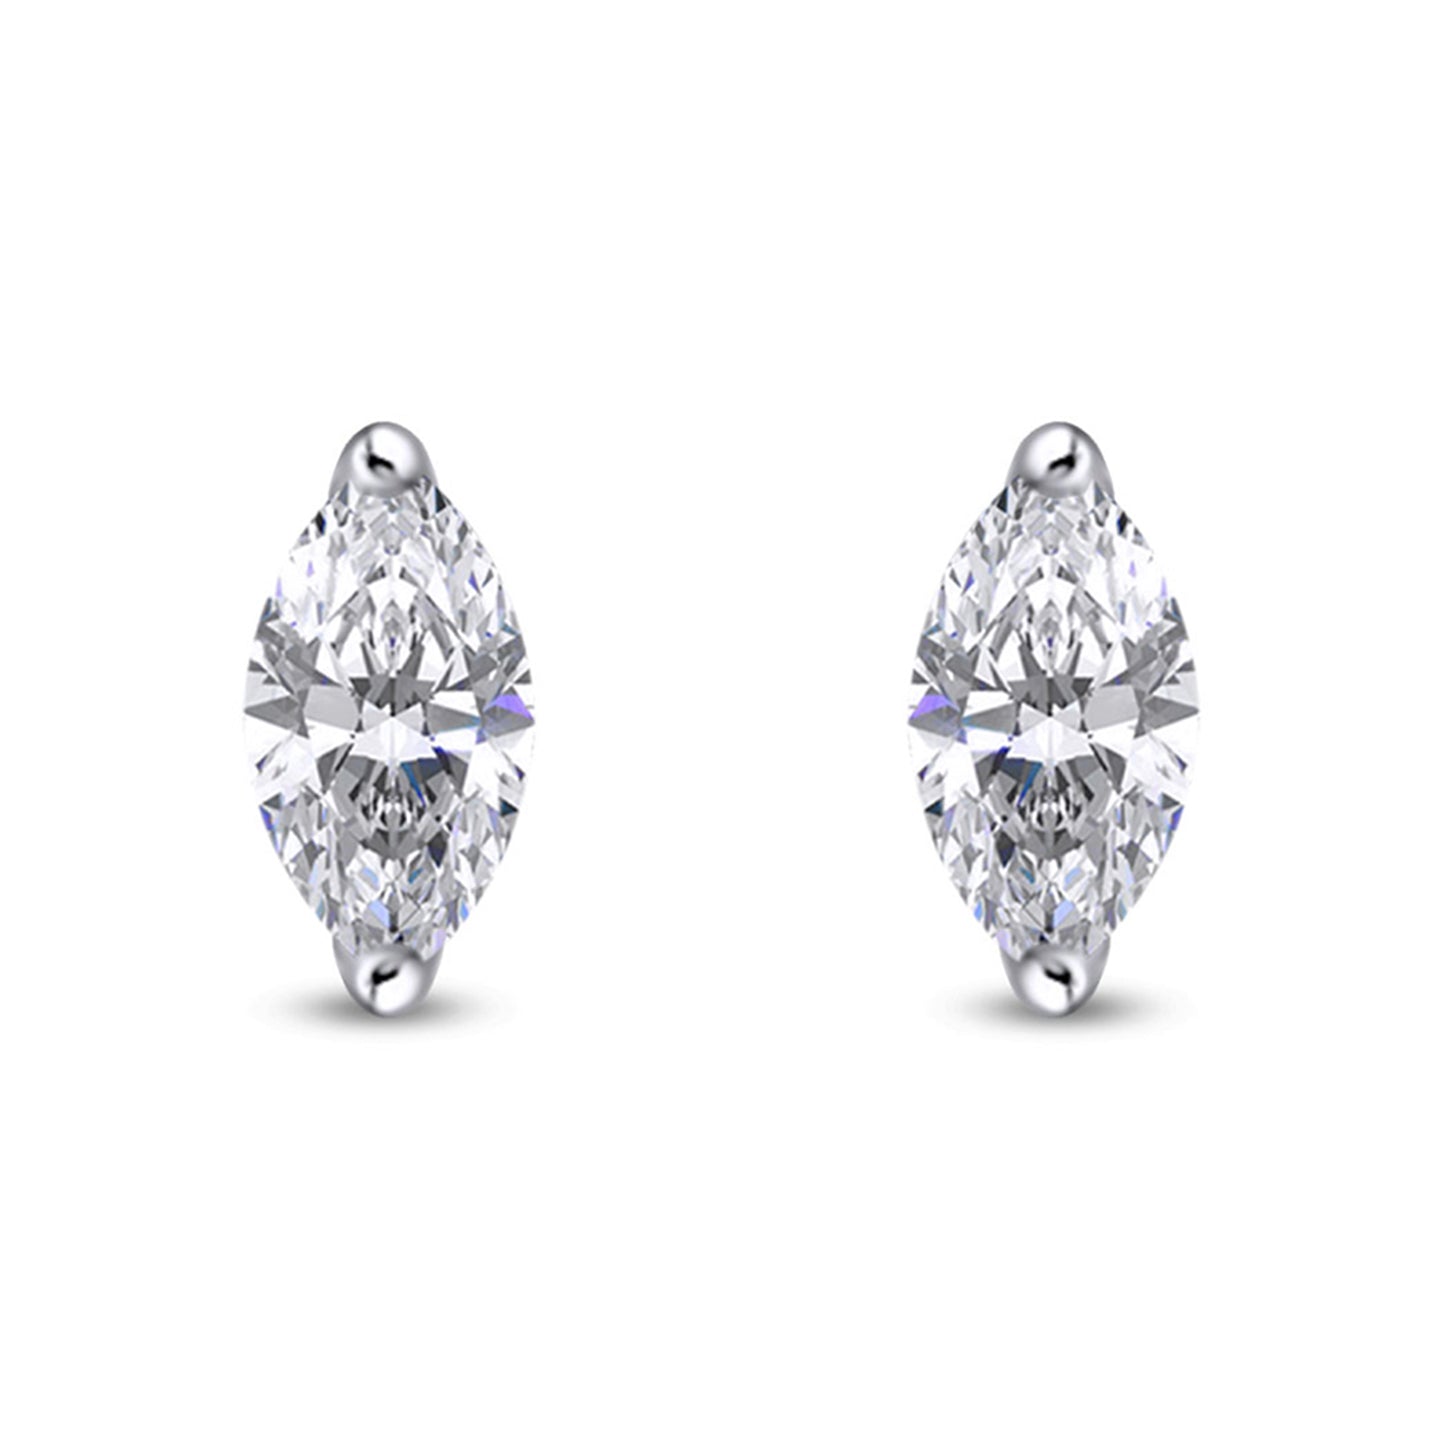 White Cubic Zirconia Marquise Frame Stud Earrings in 925 Sterling Silver with Push Back